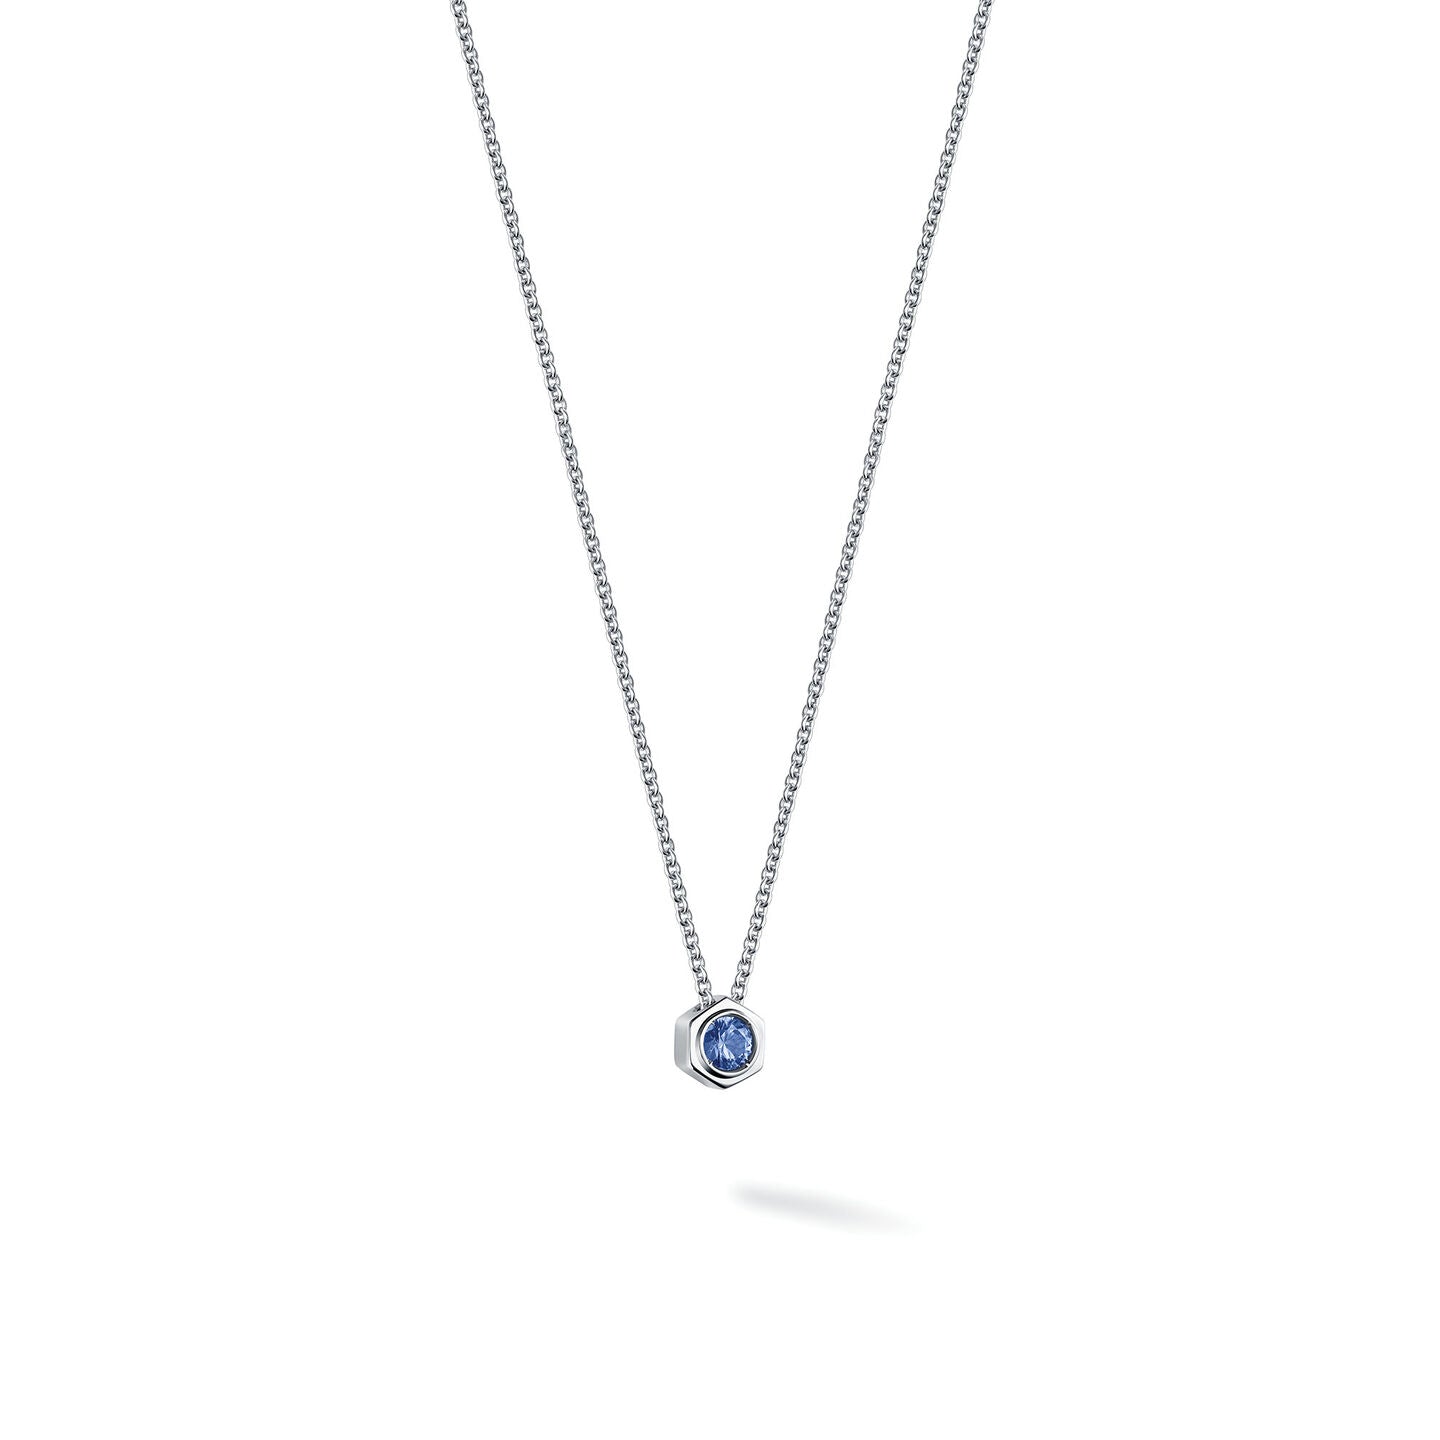 Birks Bee Chic Sapphire and Silver Necklace